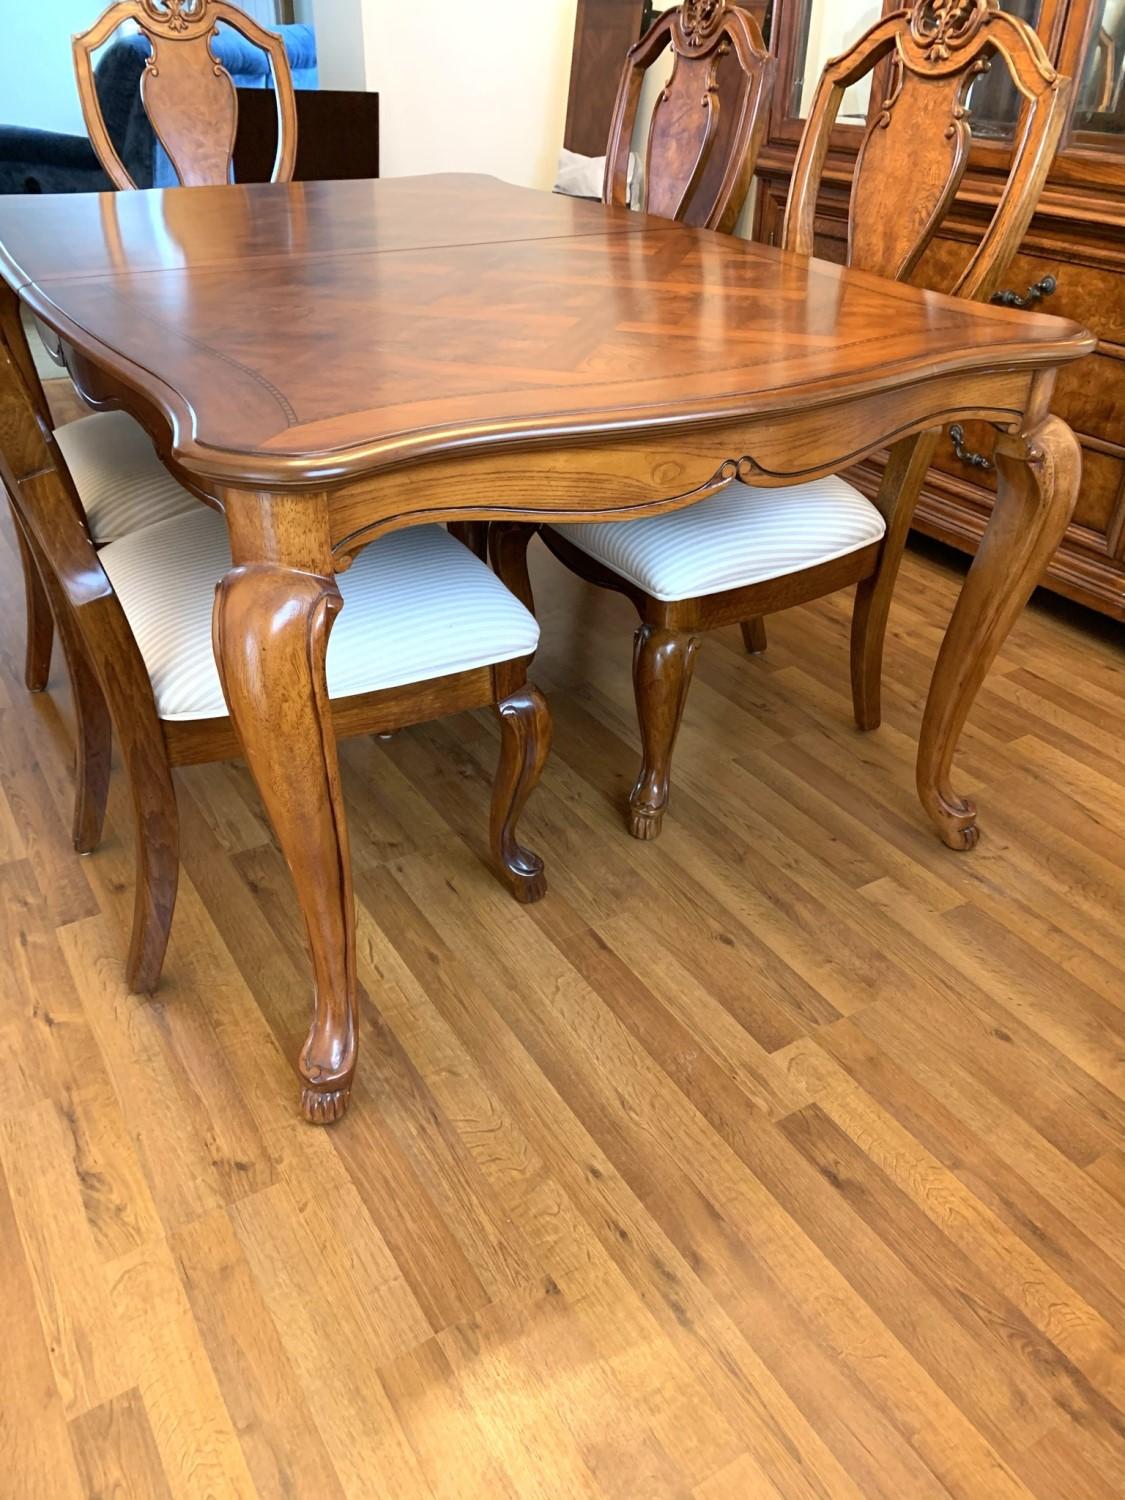 Beautiful Dining Table with 6 Chairs, China Hutch, and Buffet